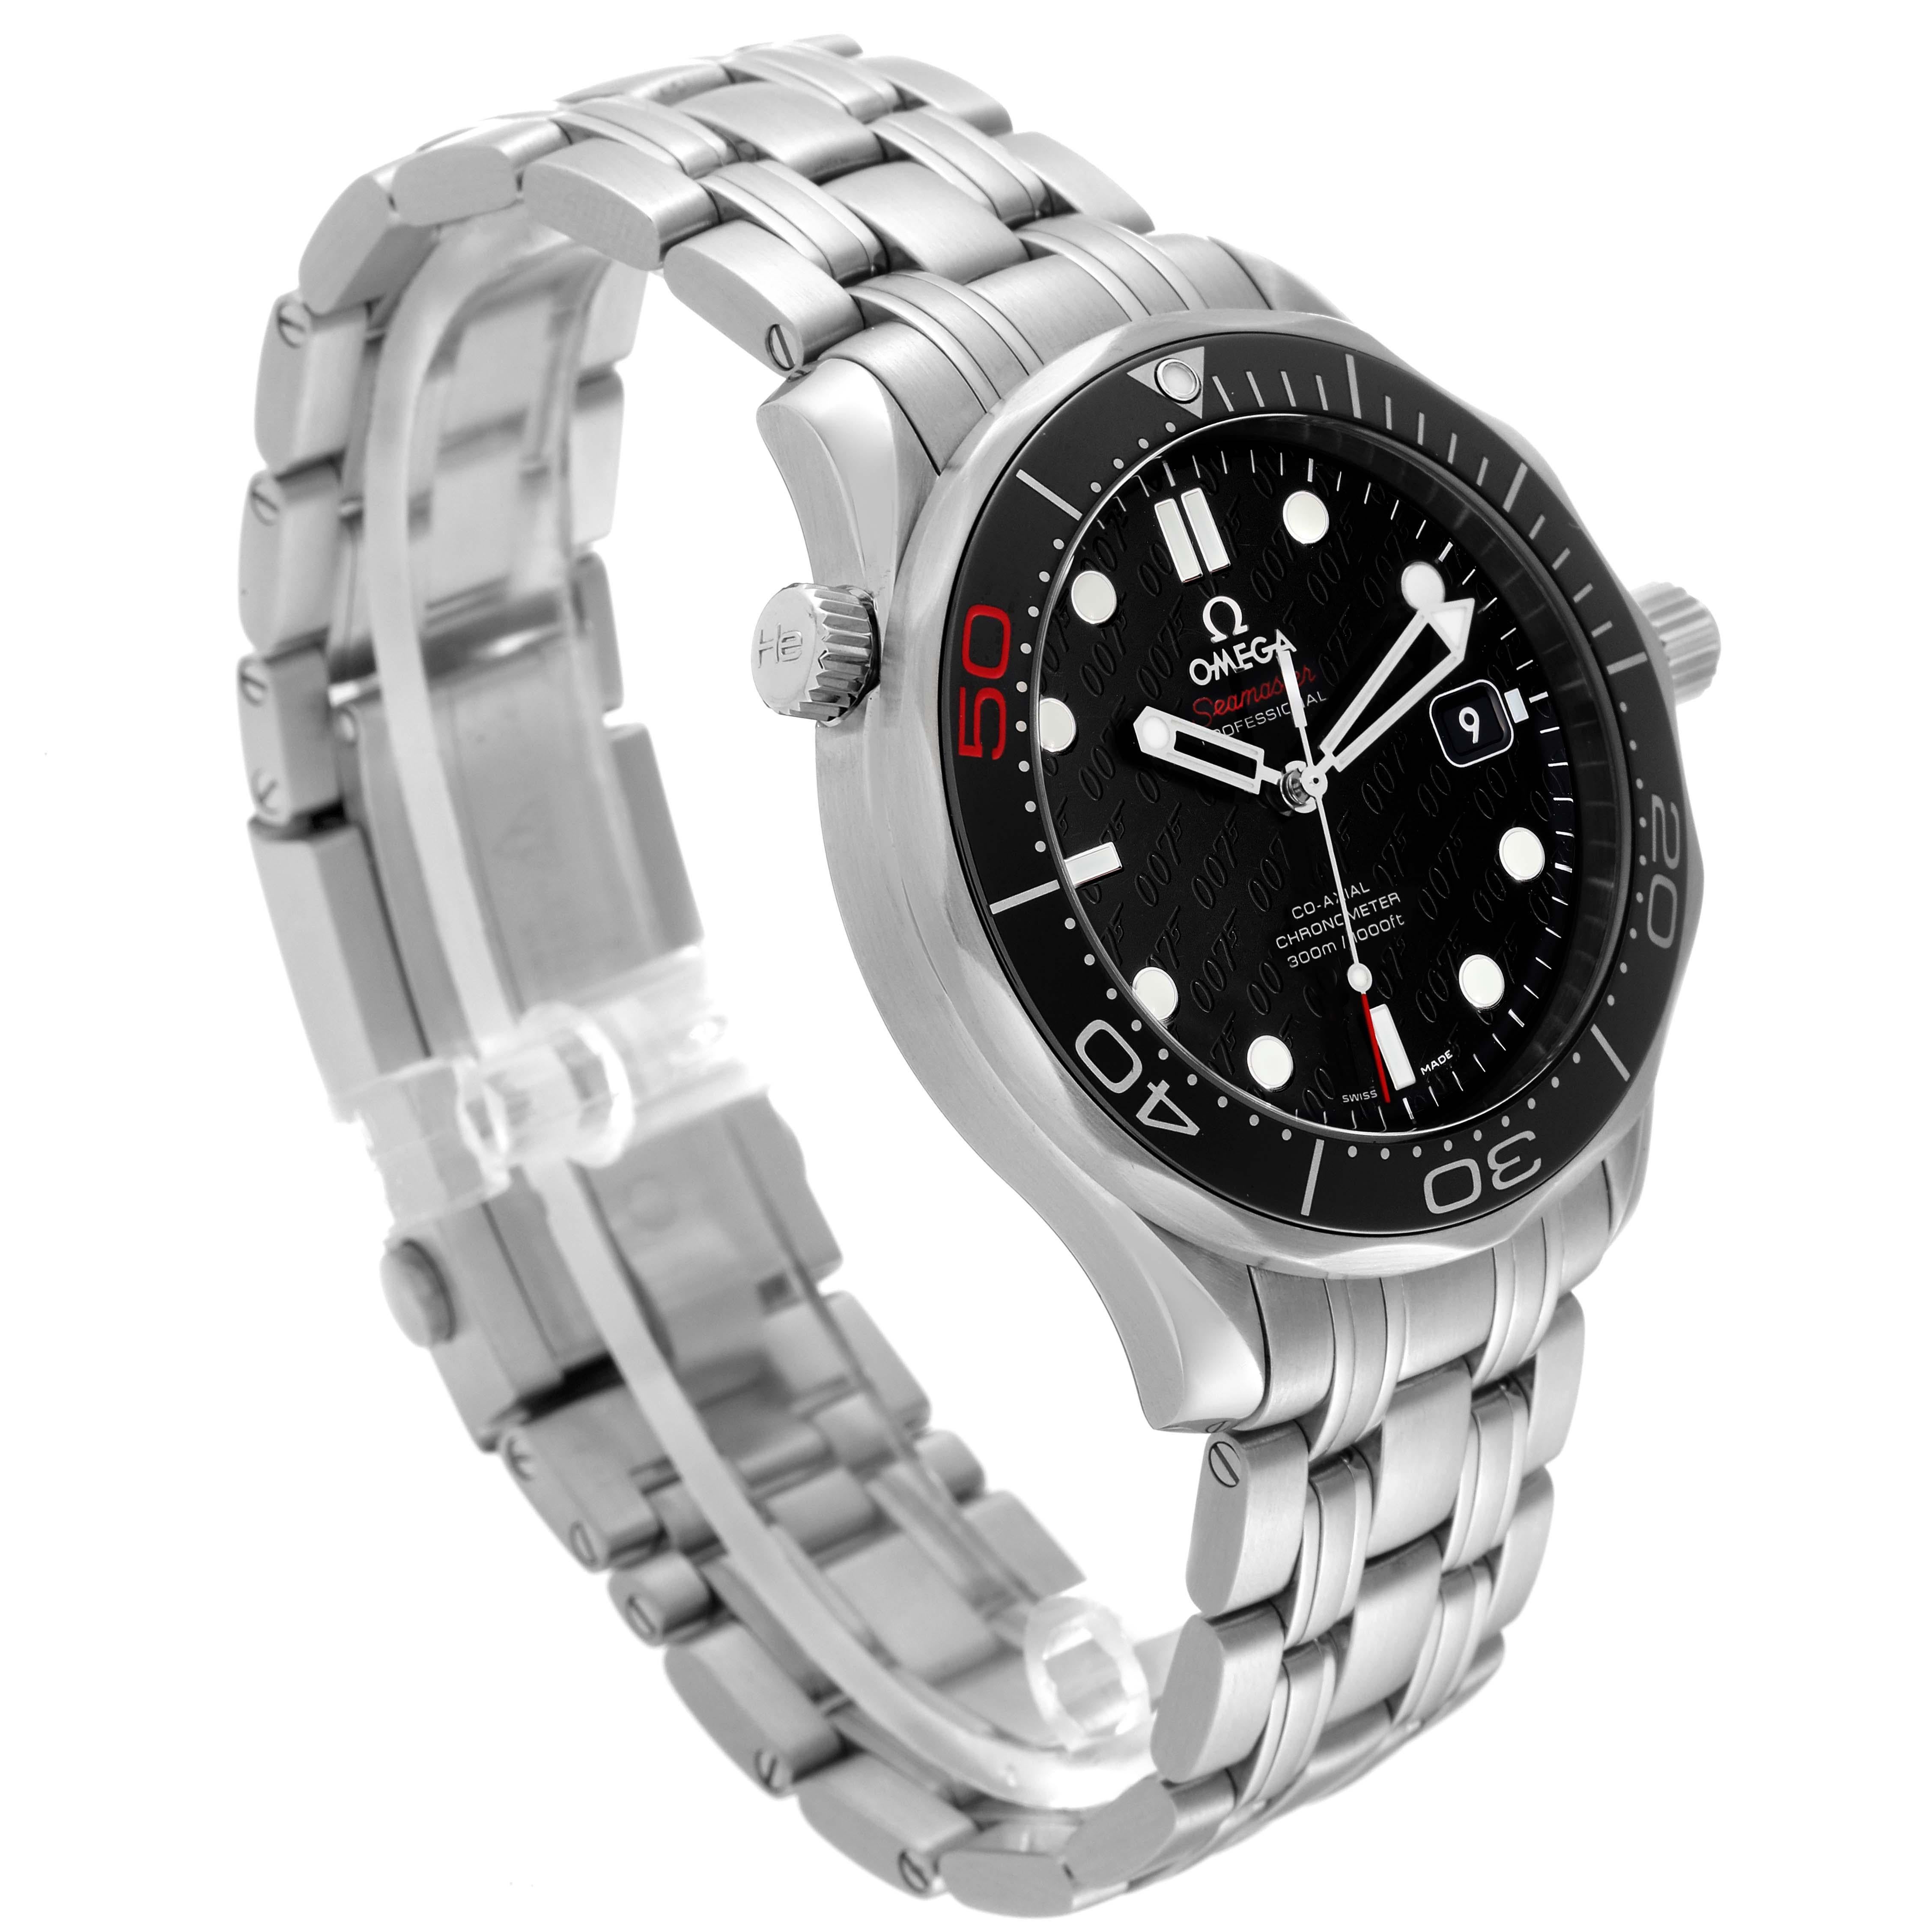 Men's Omega Seamaster Limited Edition Bond 007 Steel Mens Watch 212.30.41.20.01.005 For Sale